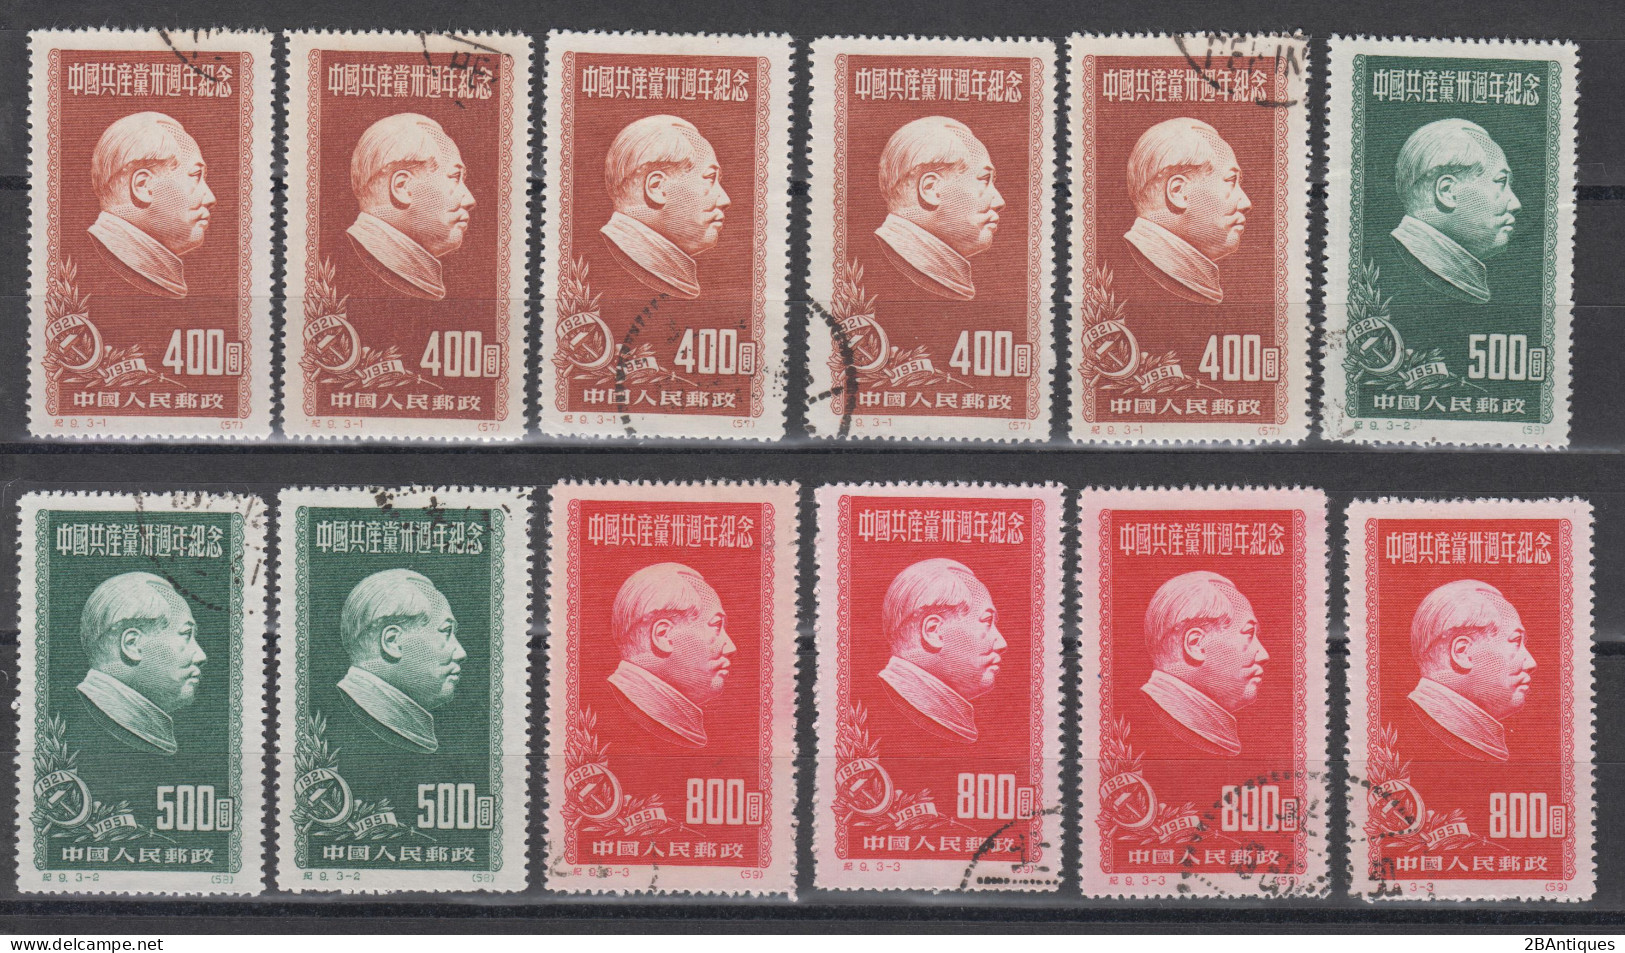 PR CHINA 1951 - The 30th Anniversary Of The Communist Party Of China - Mao Zedong CTO 12 Stamps - Used Stamps